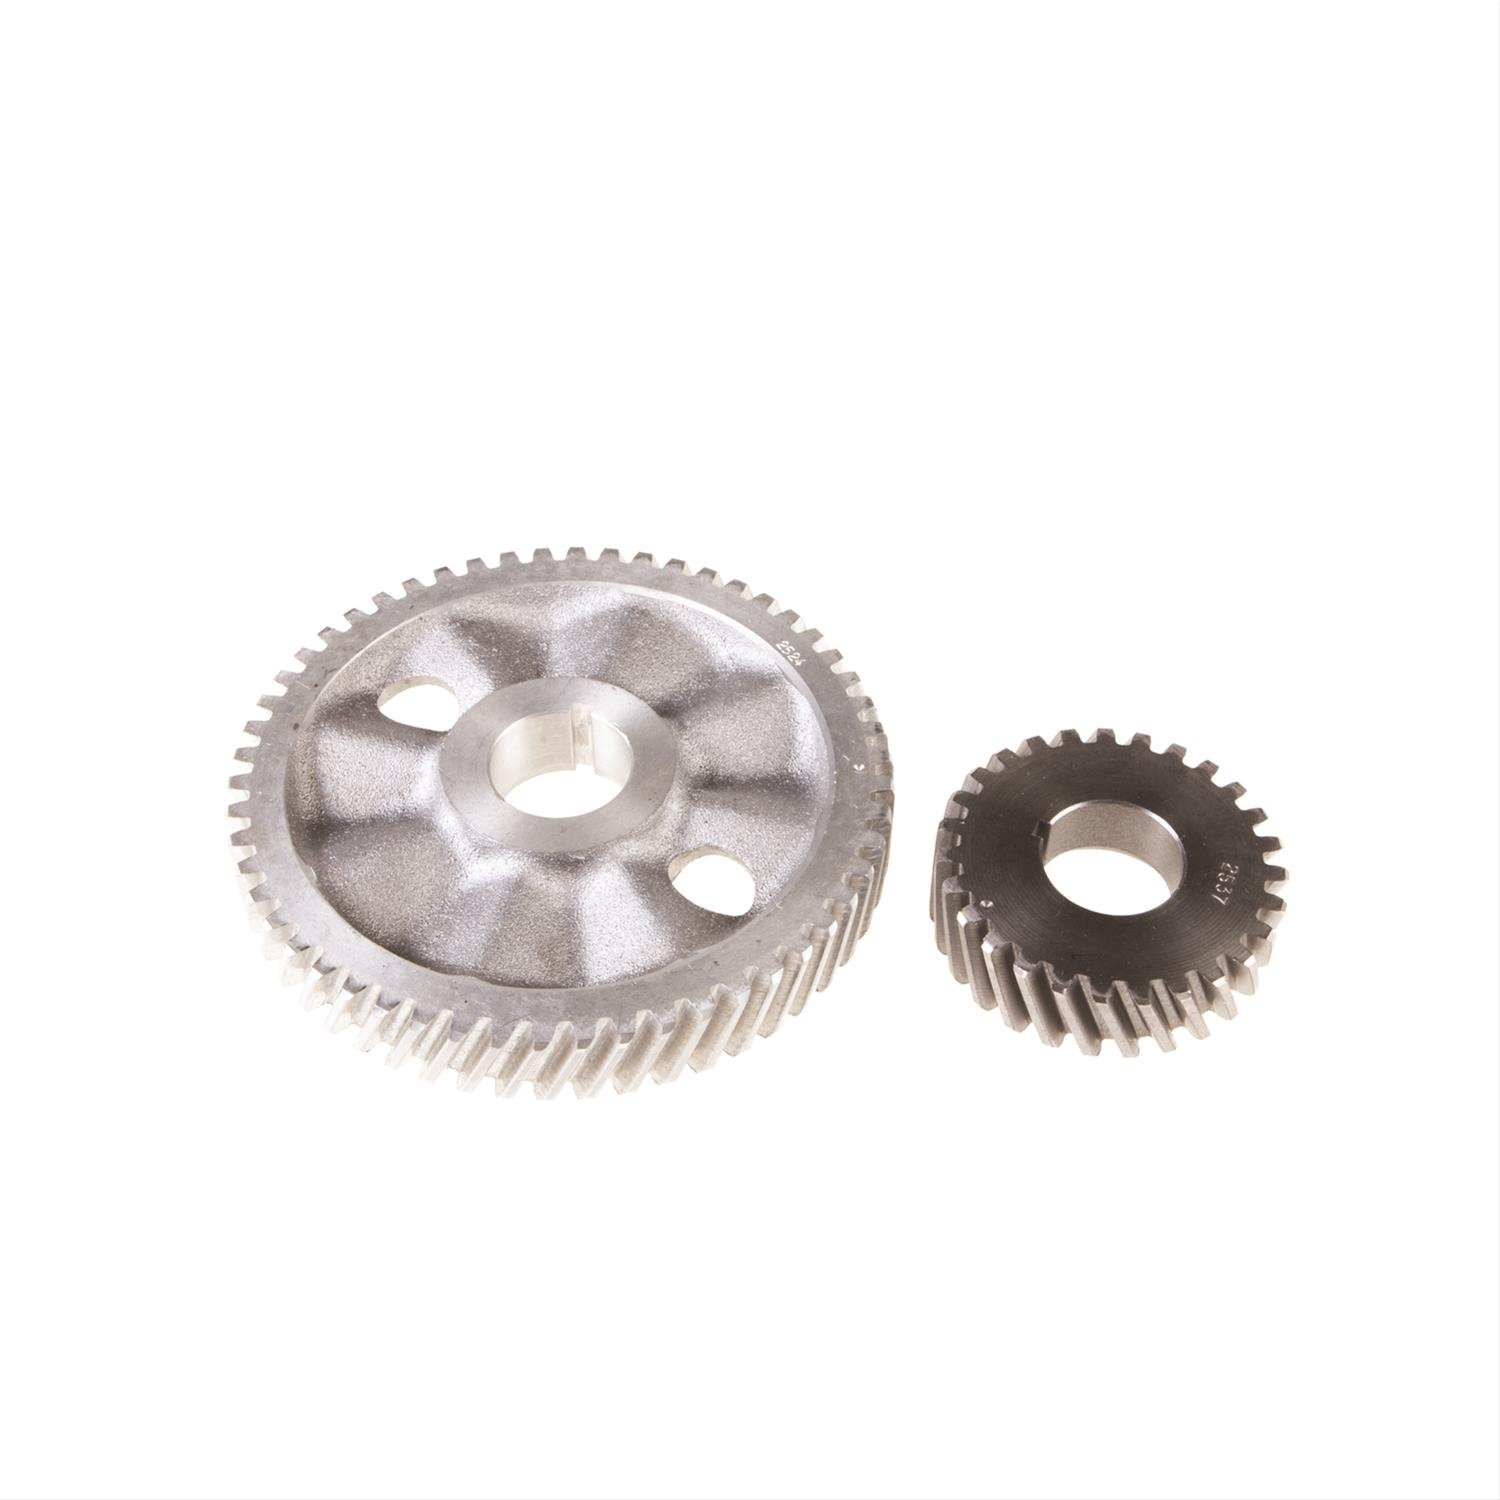 2538S Stock Replacement Gear Set